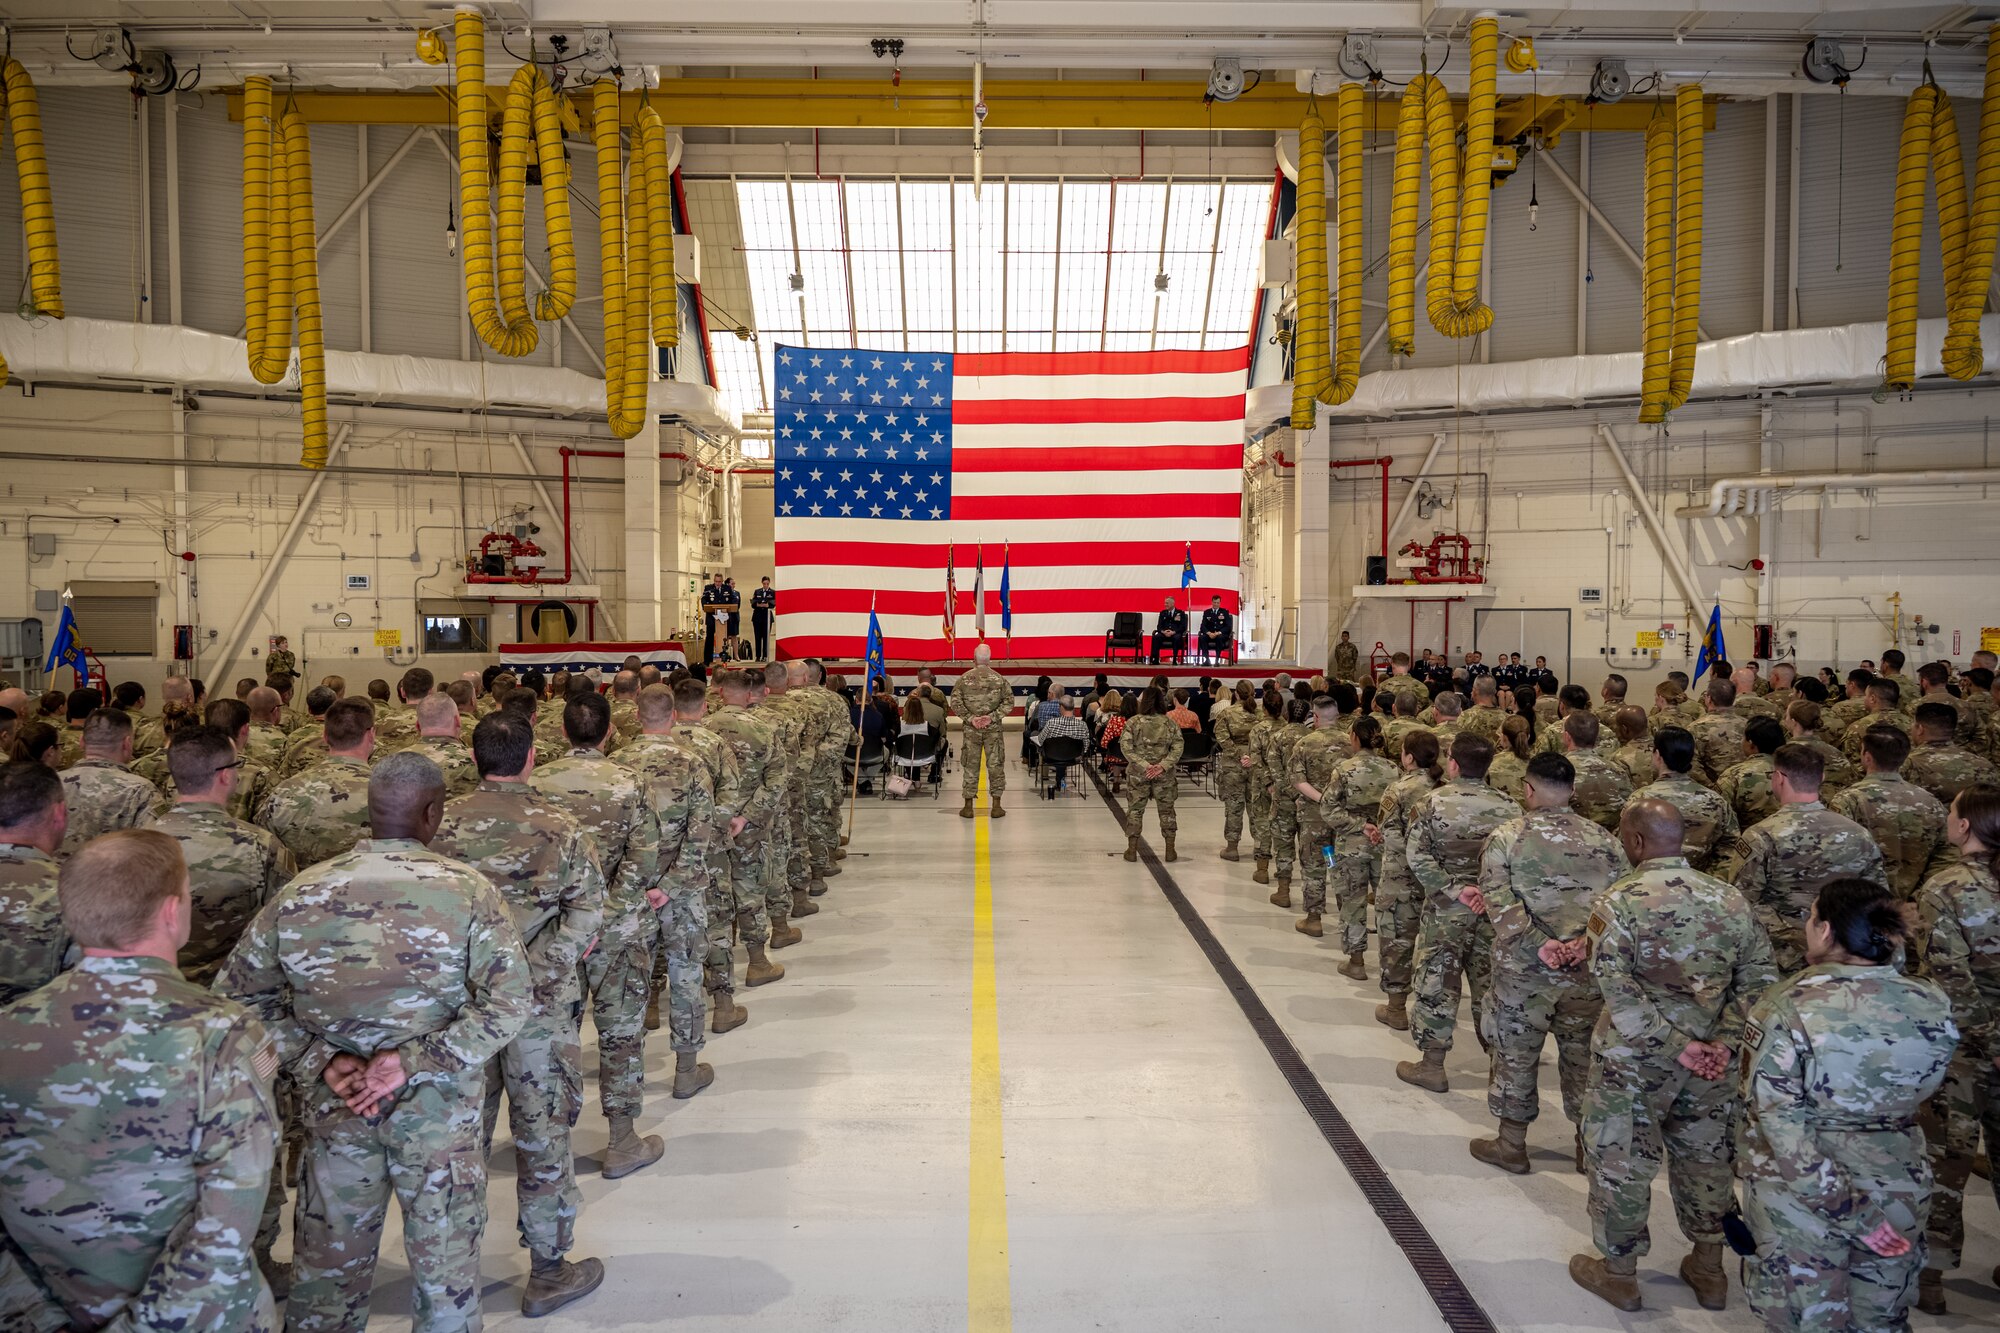 Military troops stand in formation before a change of command ceremony in a hangar.